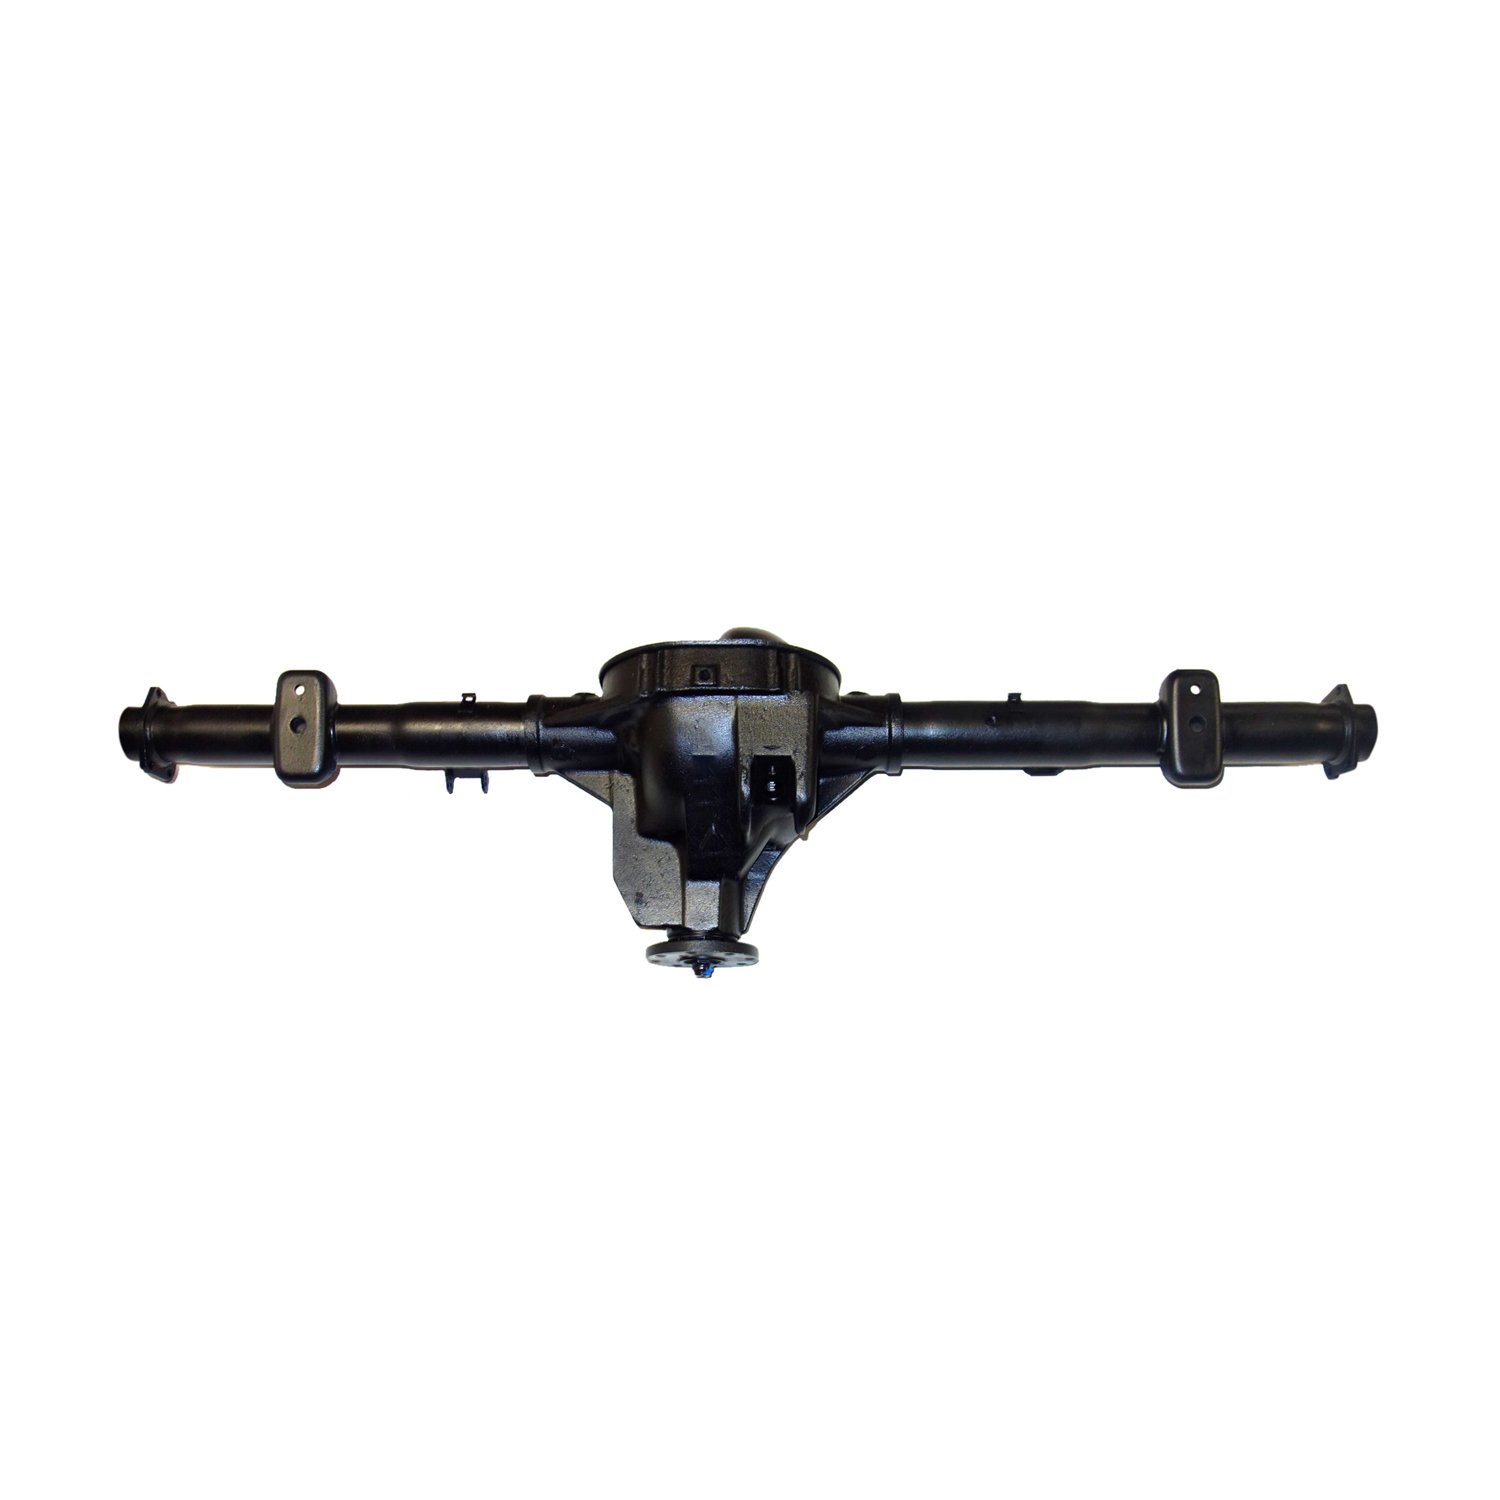 Remanufactured Complete Axle Assy for 8.8" 95-01 Explorer, Exc Sport Trac, 3.27, Posi LSD